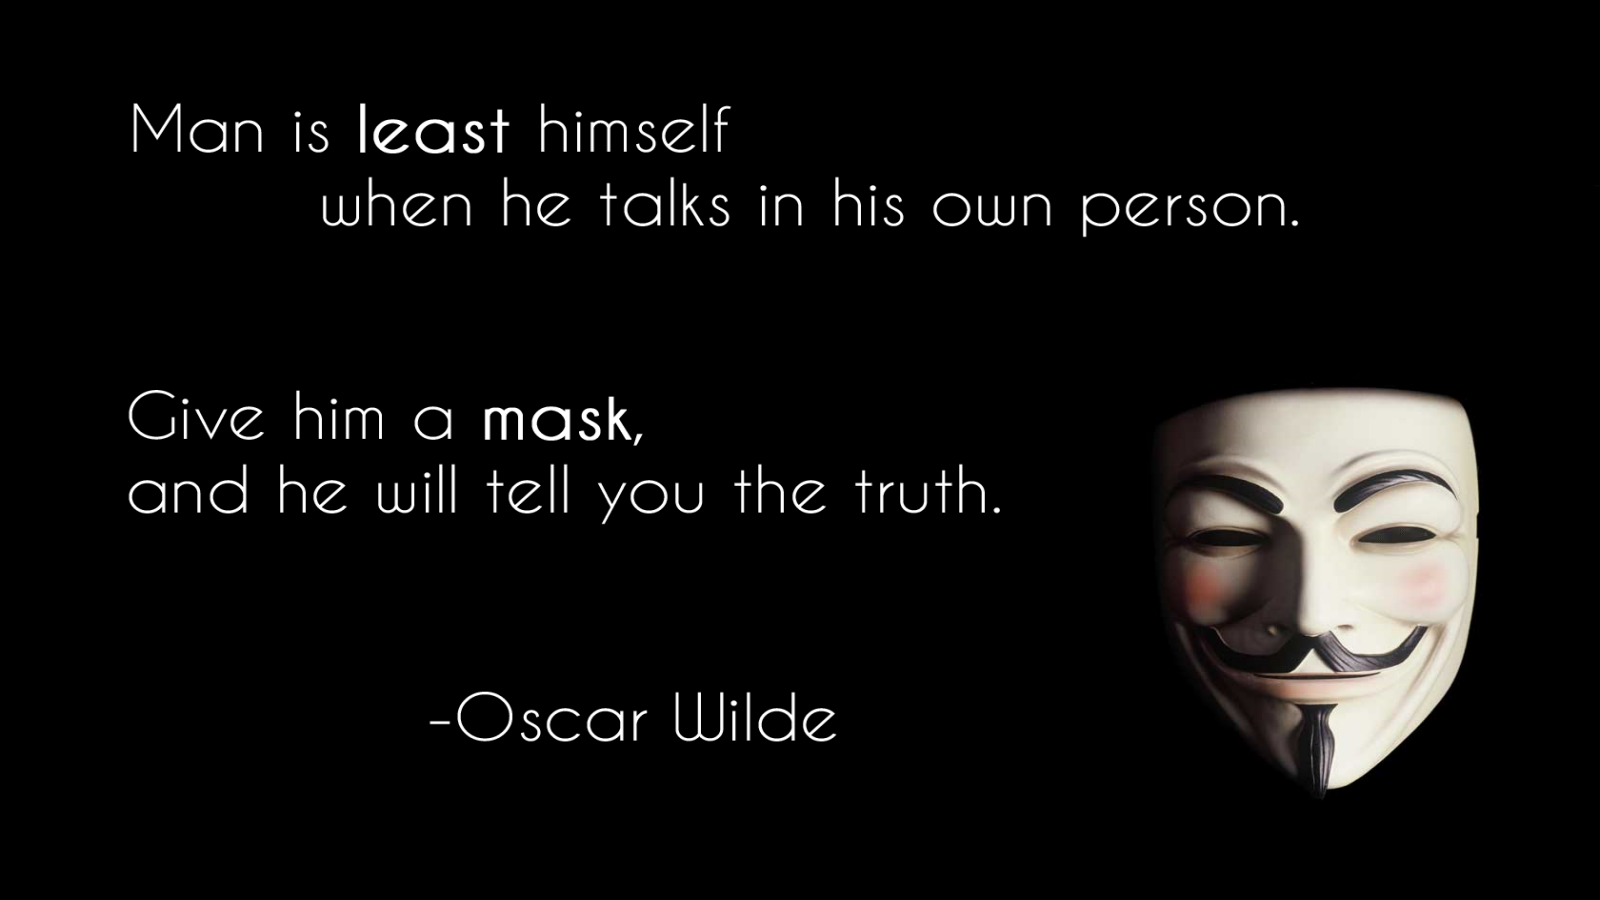 General 1600x900 Anonymous (hacker group) quote minimalism mask typography Guy Fawkes mask text Oscar Wilde